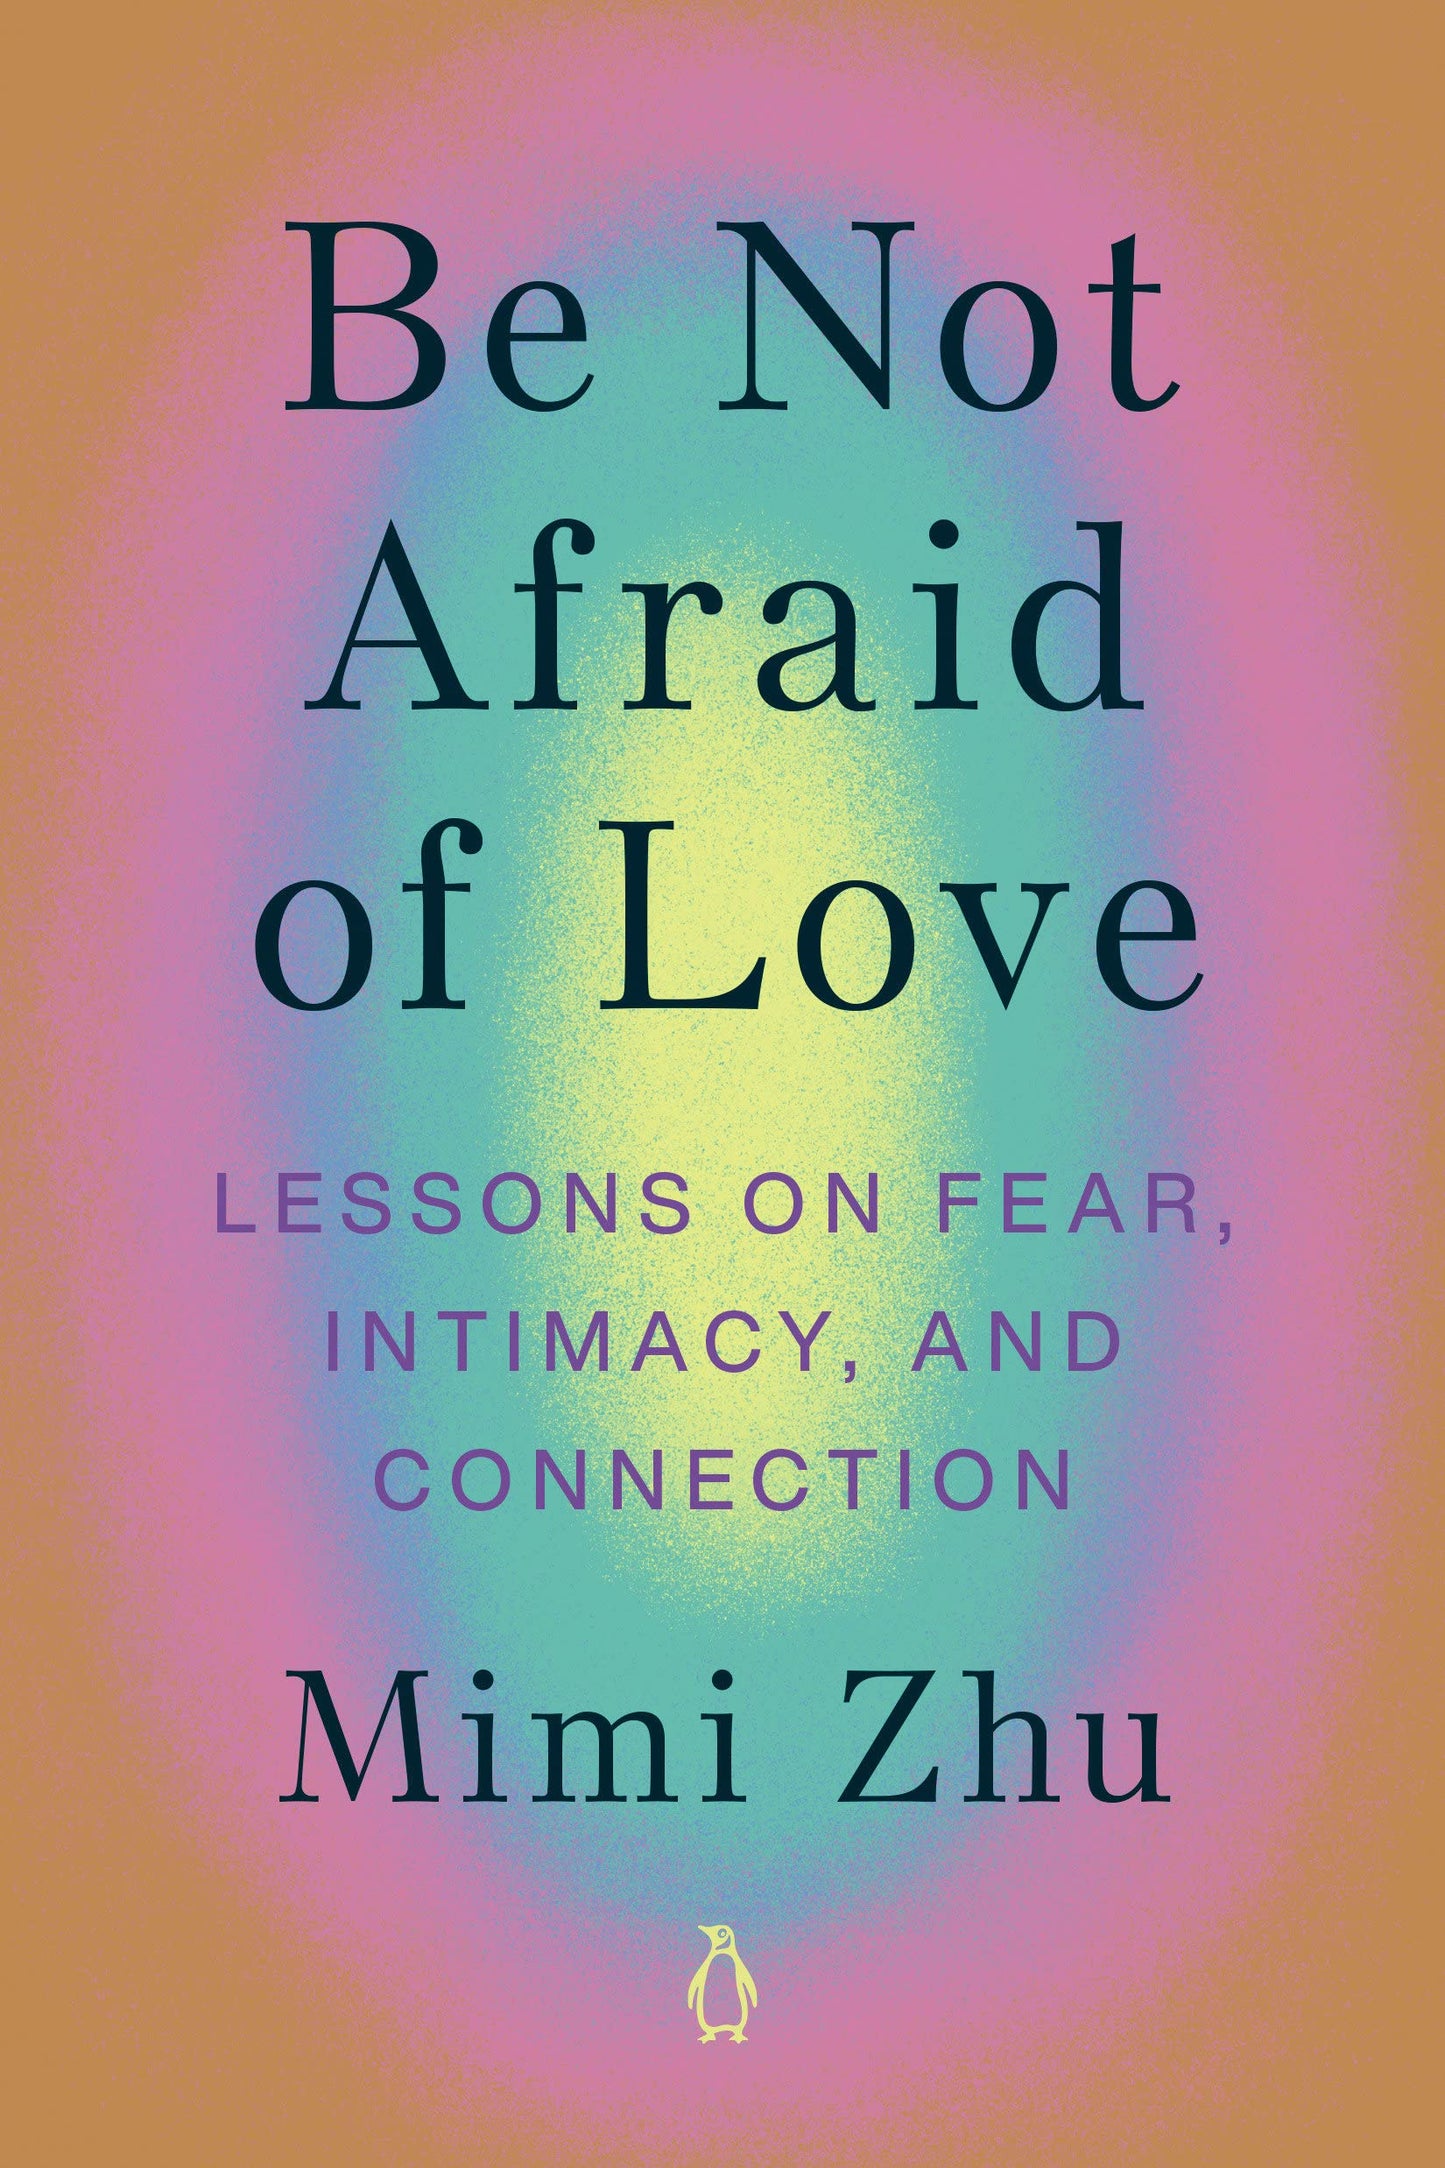 Be Not Afraid of Love // Lessons on Fear, Intimacy, and Connection